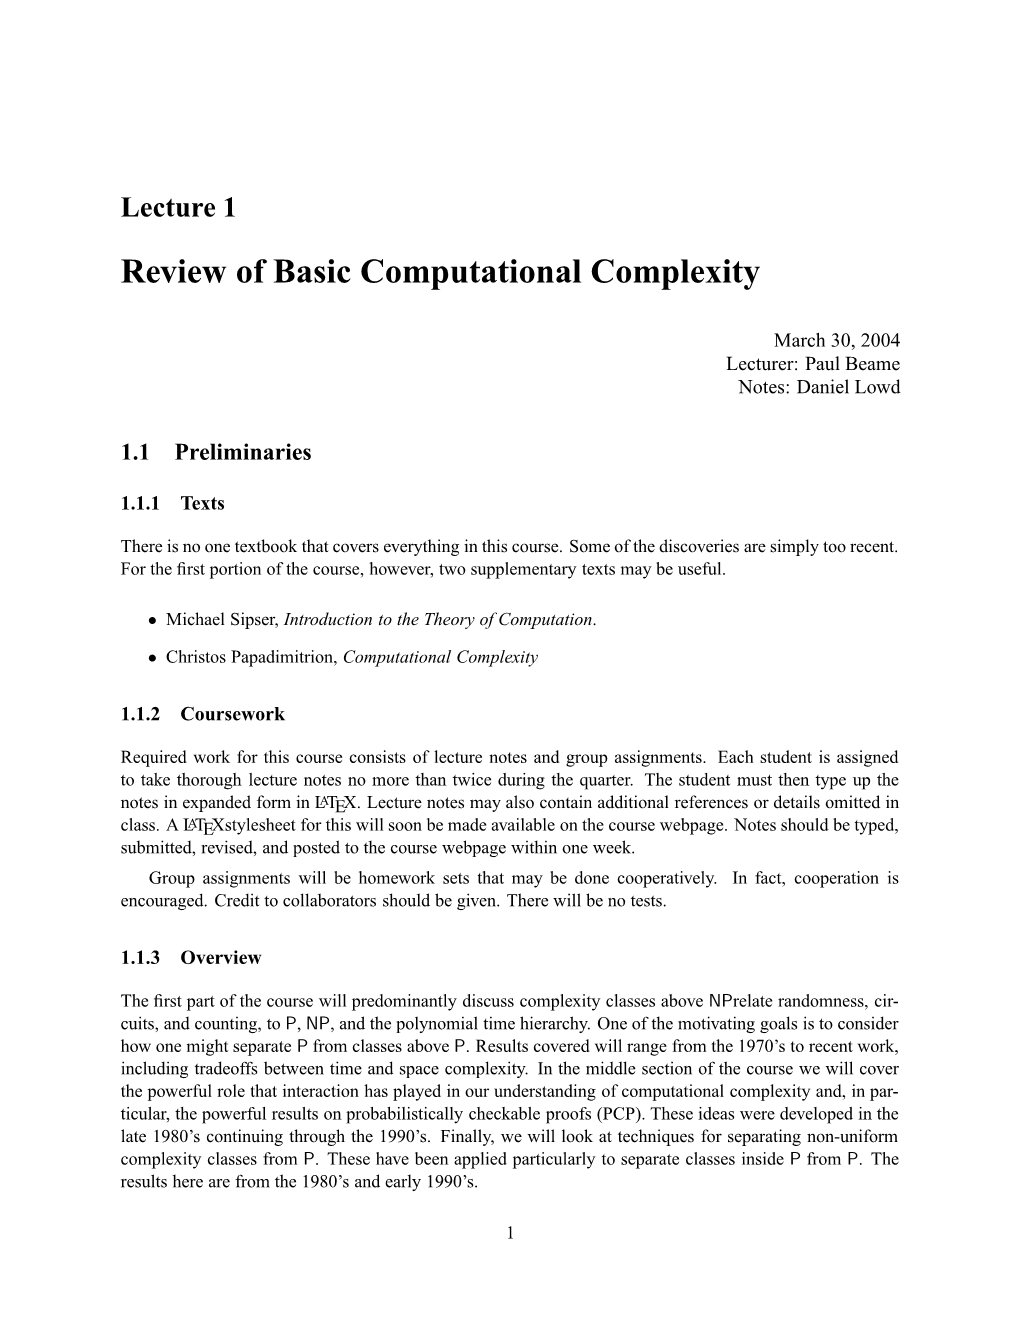 Lecture 1 Review of Basic Computational Complexity